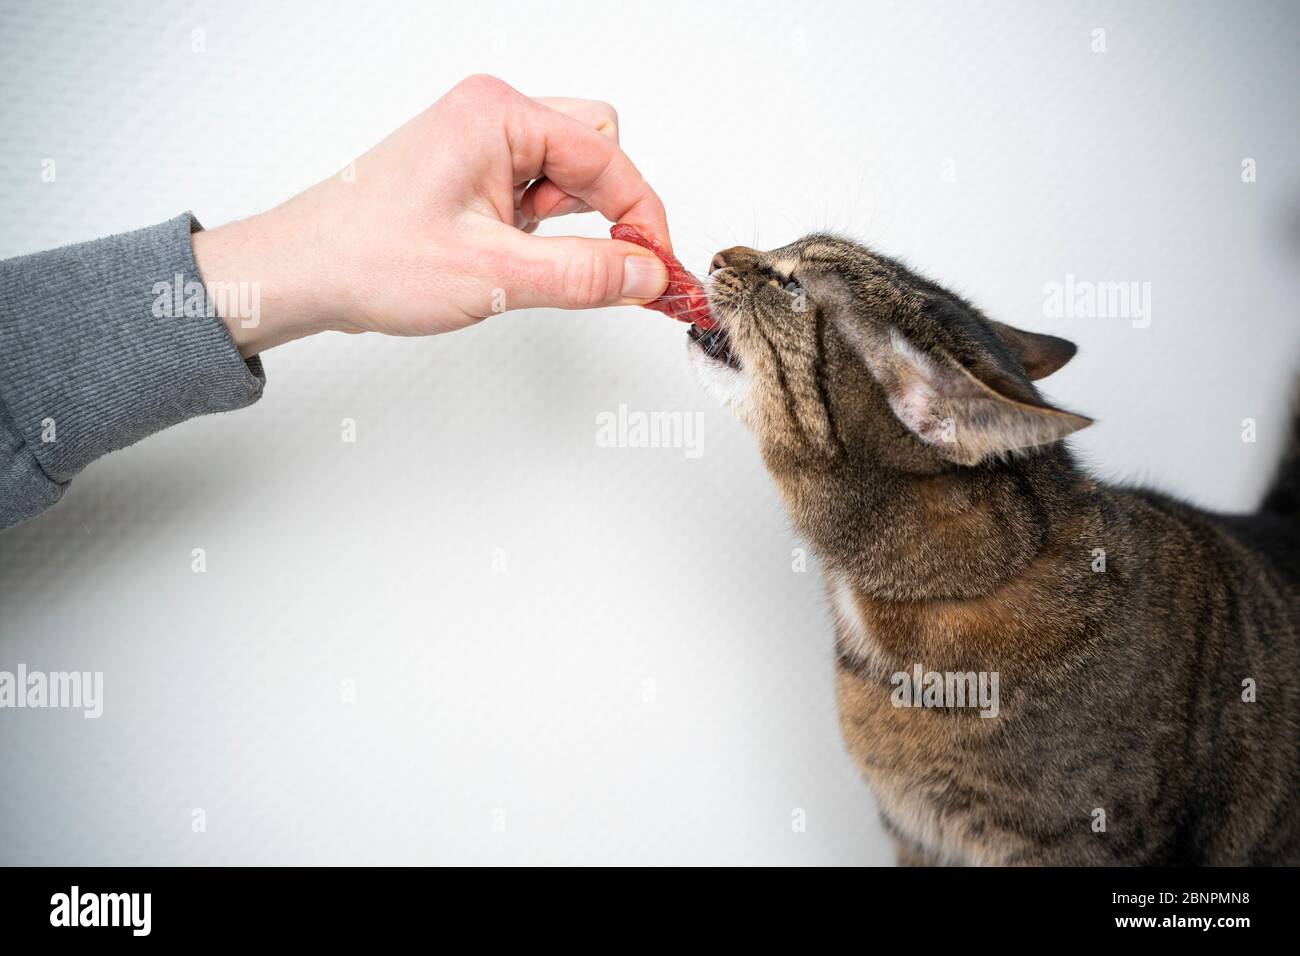 side view of human hand feeding cat with raw meat beef in front of white background with copy space Stock Photo